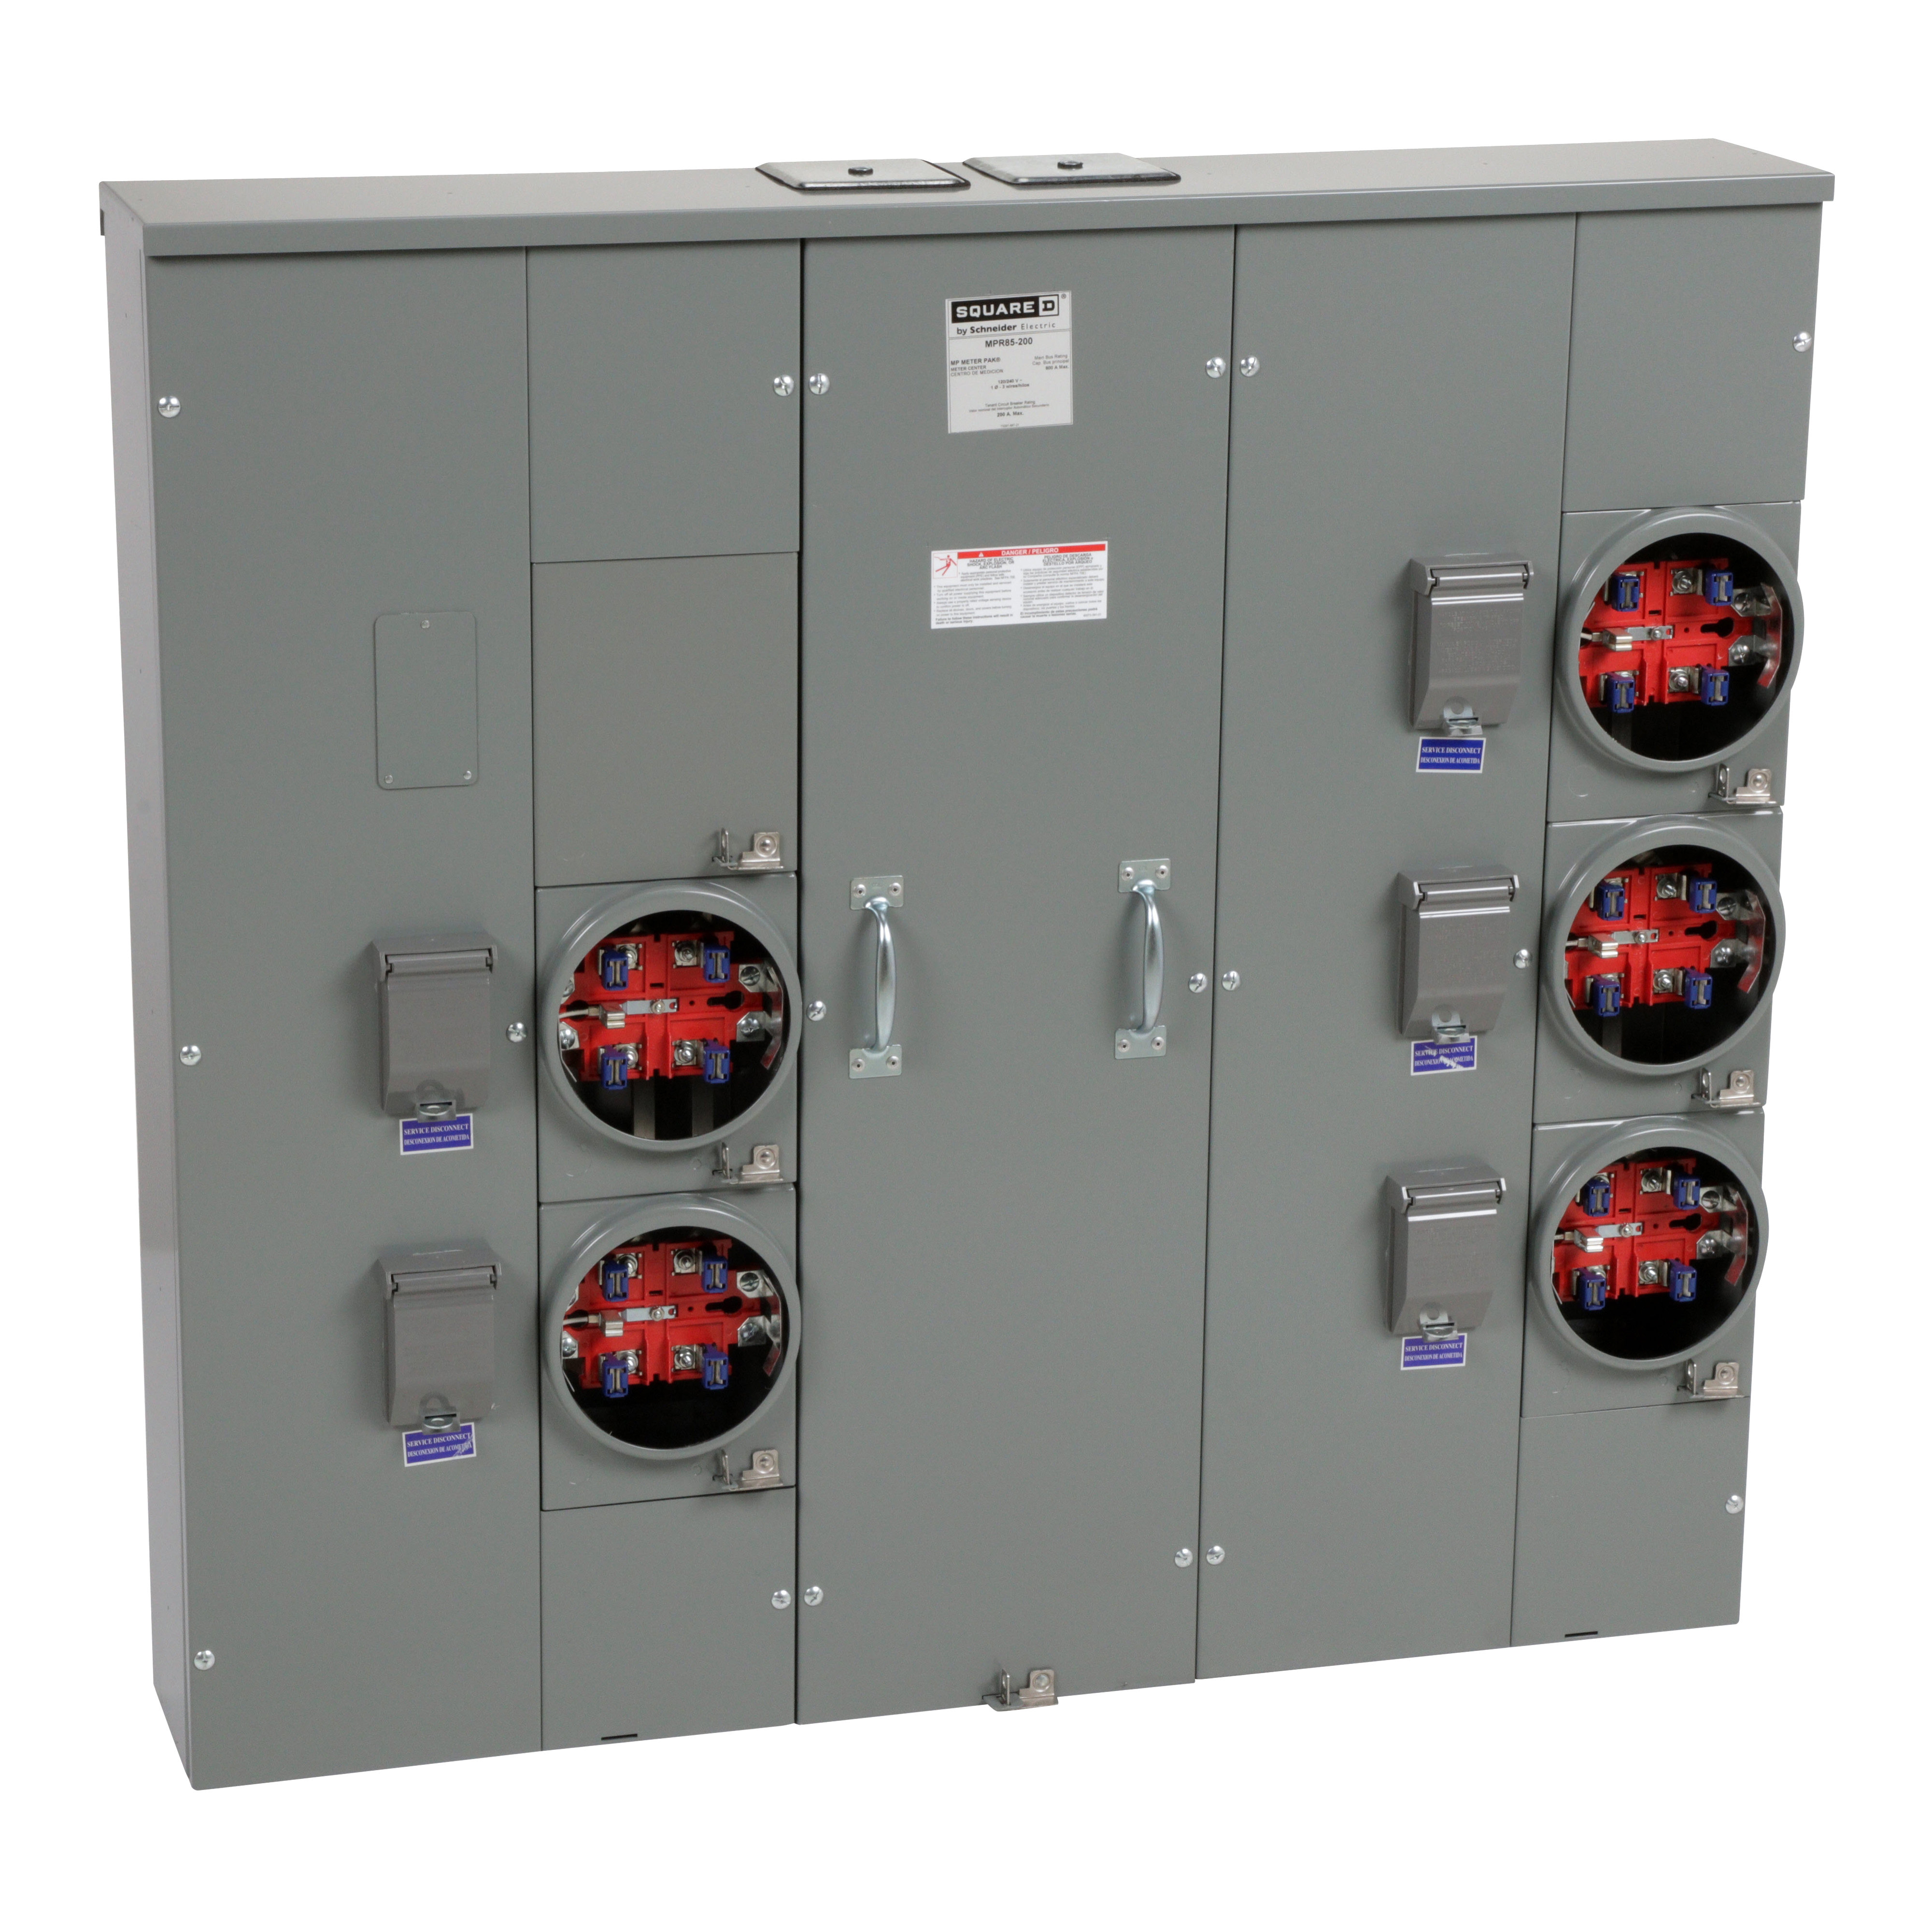 Meter center, MP Meter-Pak, 5 sockets, no bypass, 5 jaws, 800A bus, 200A max breaker rating, ringless